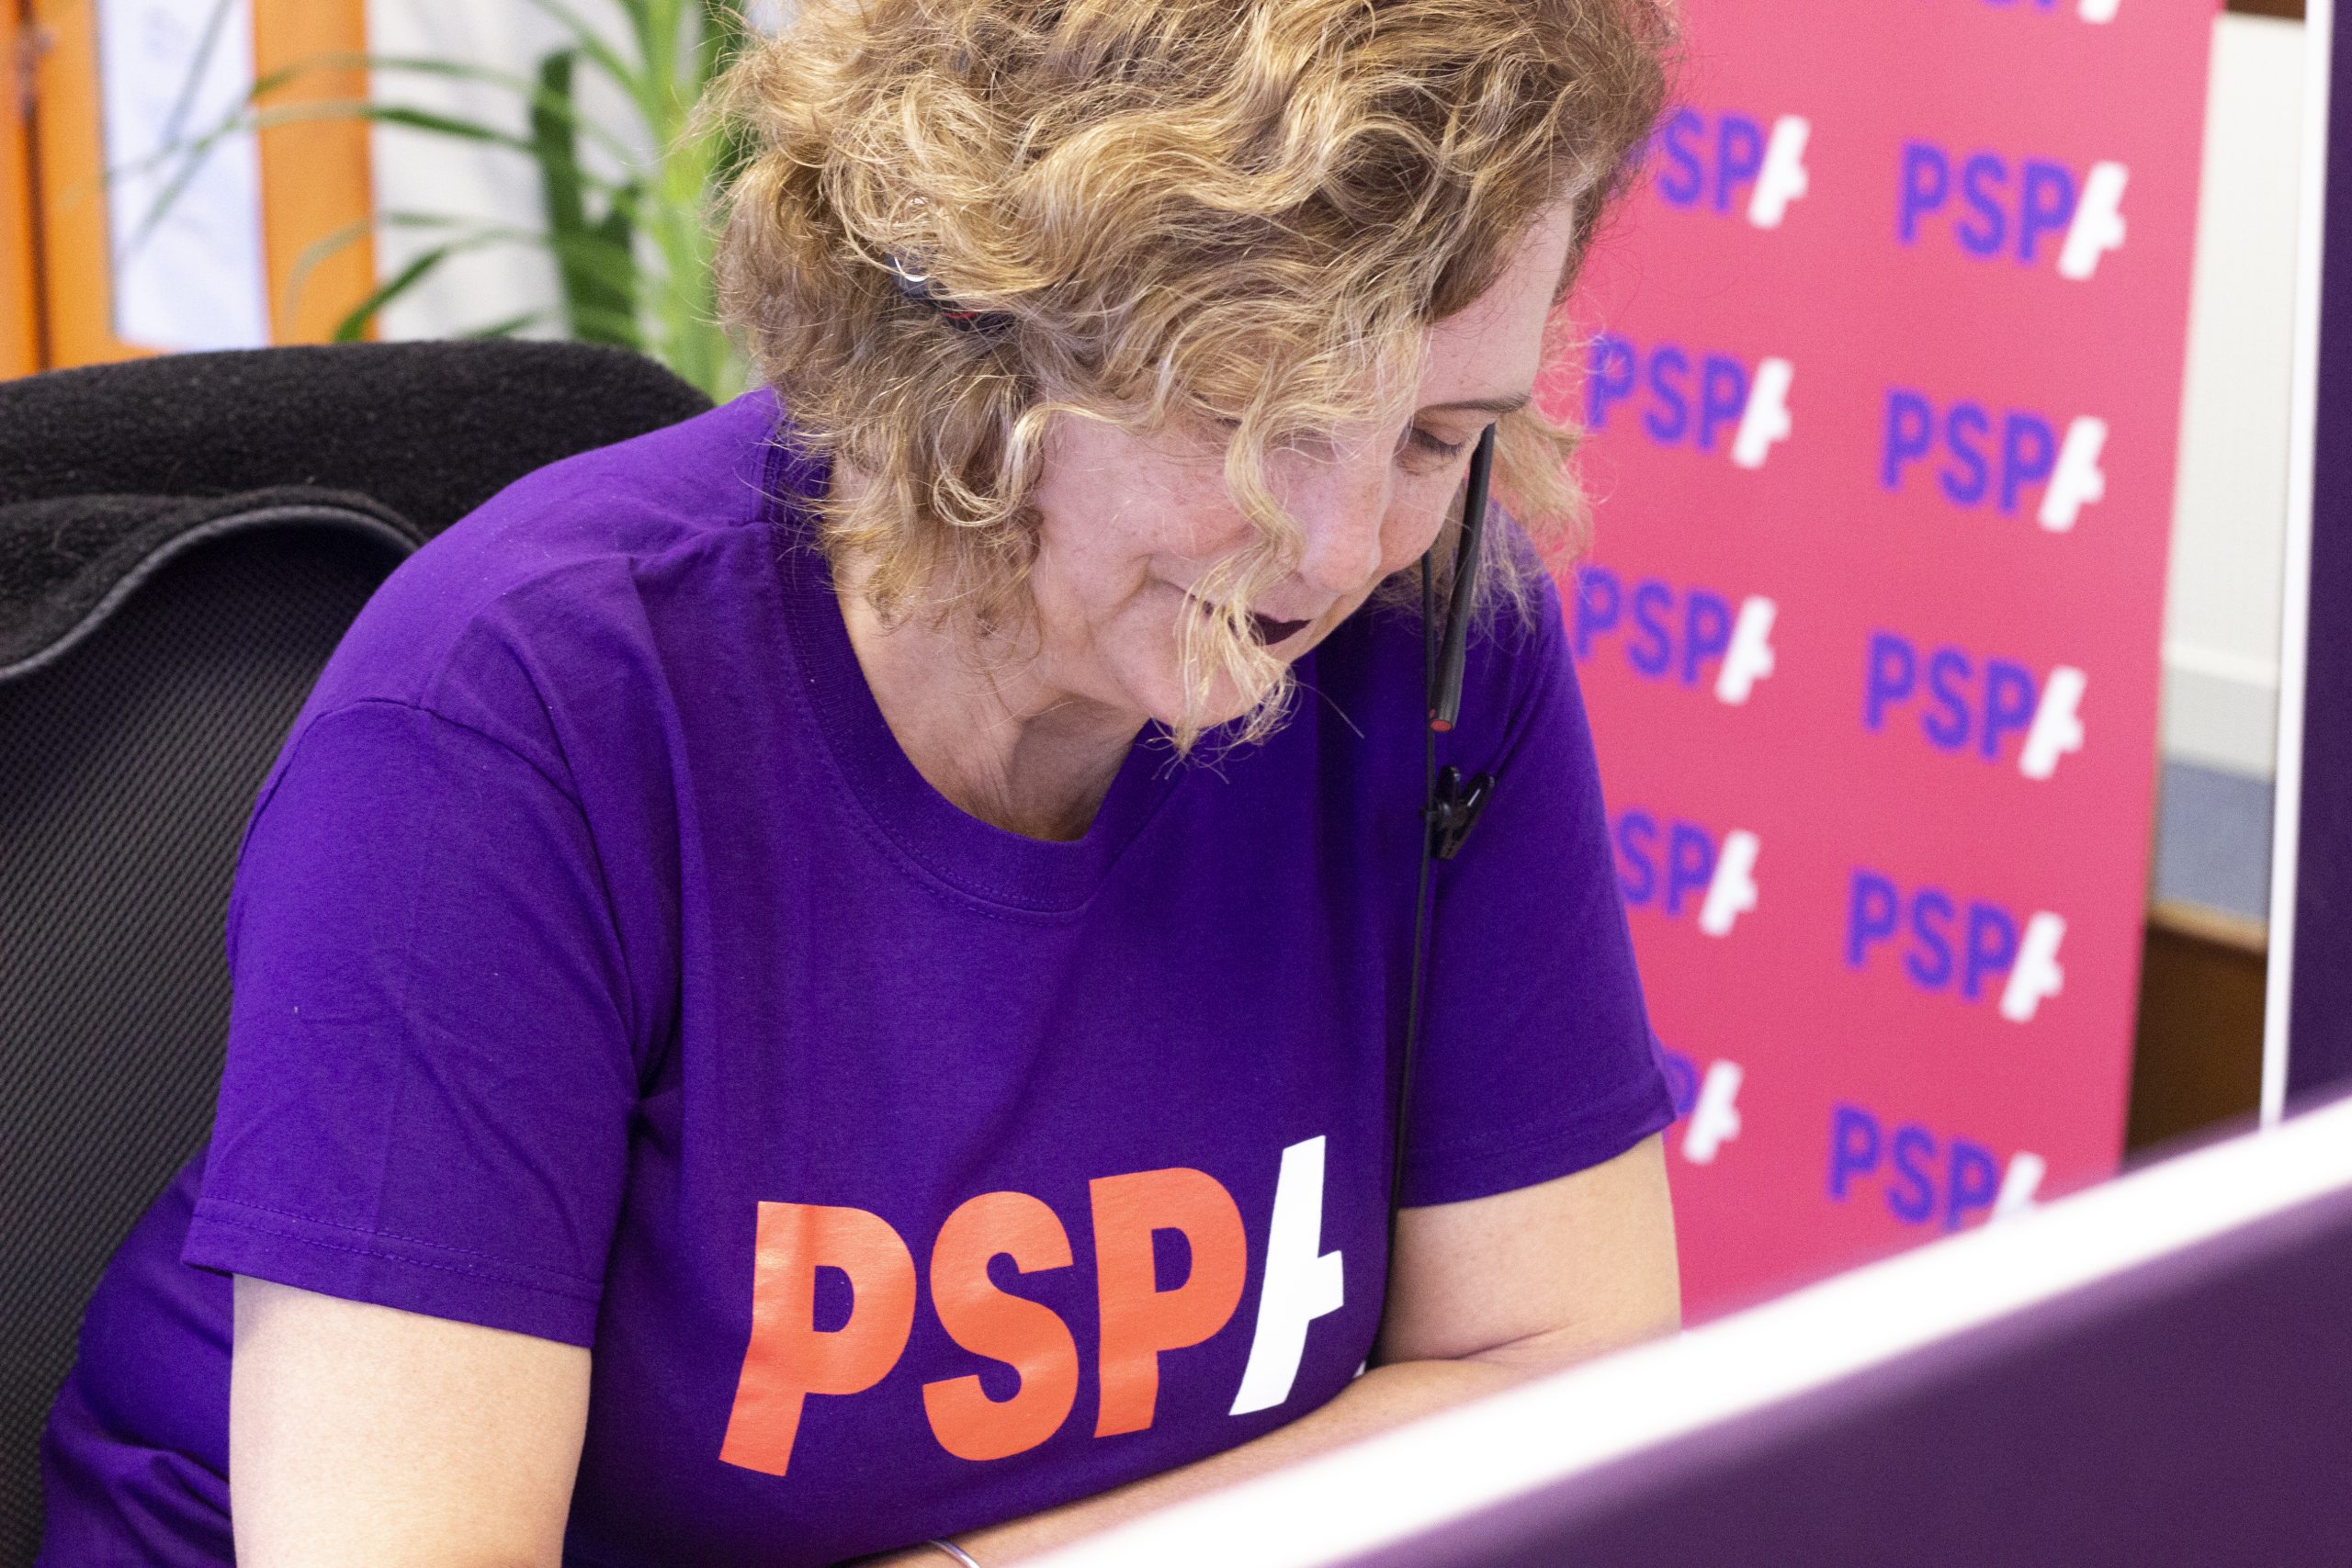 PSPA counselling support now available with Rare Minds